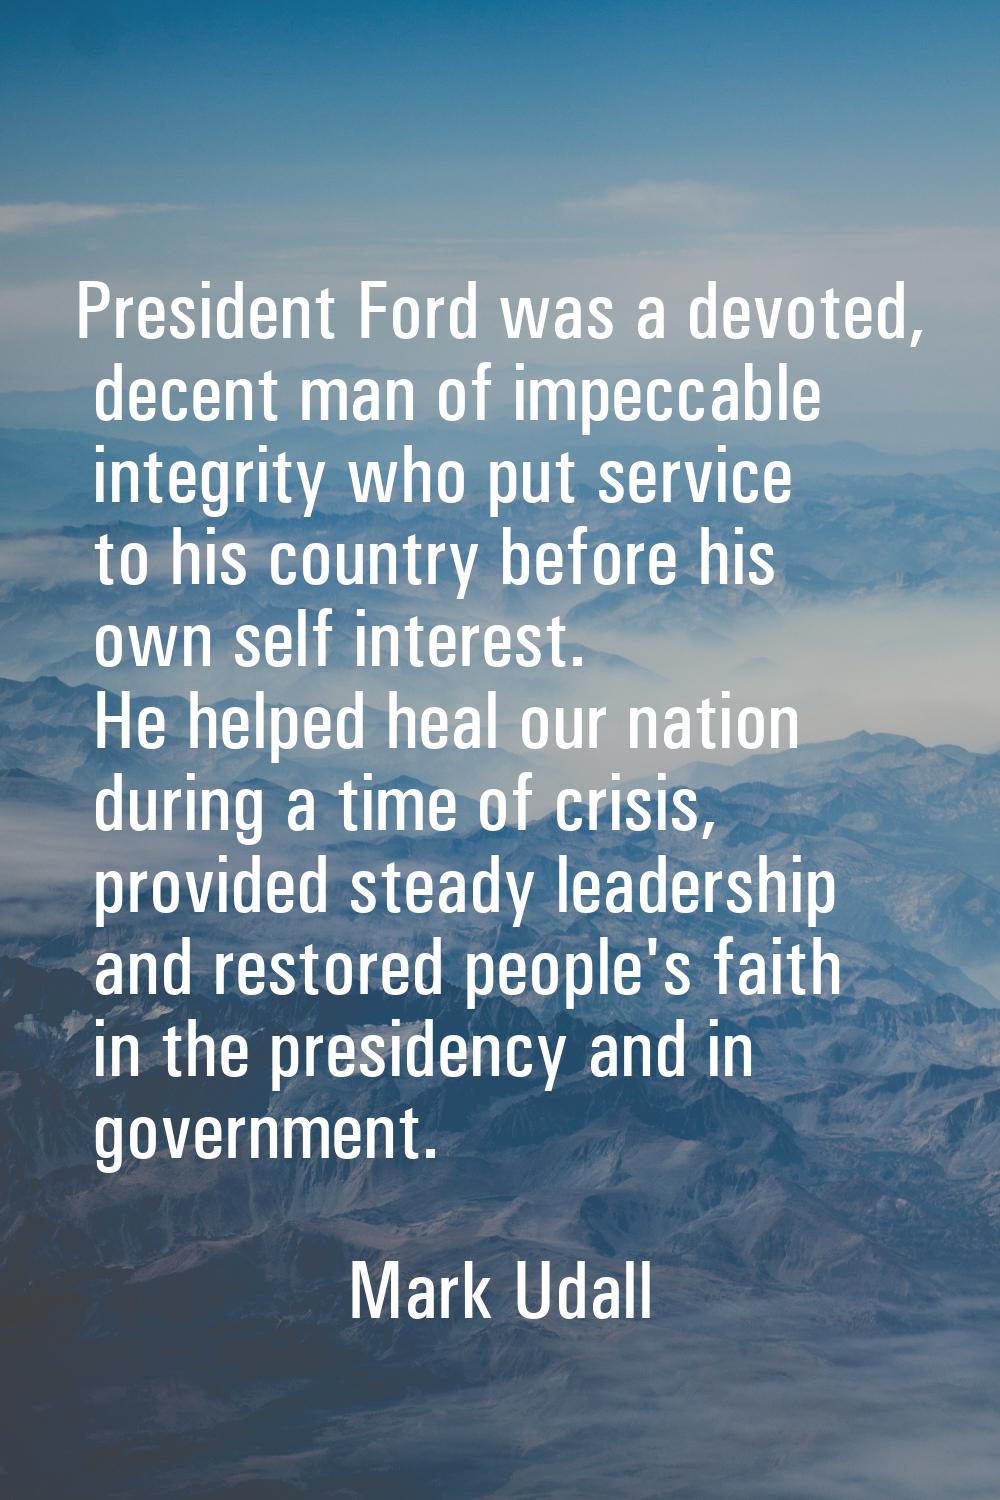 President Ford was a devoted, decent man of impeccable integrity who put service to his country bef